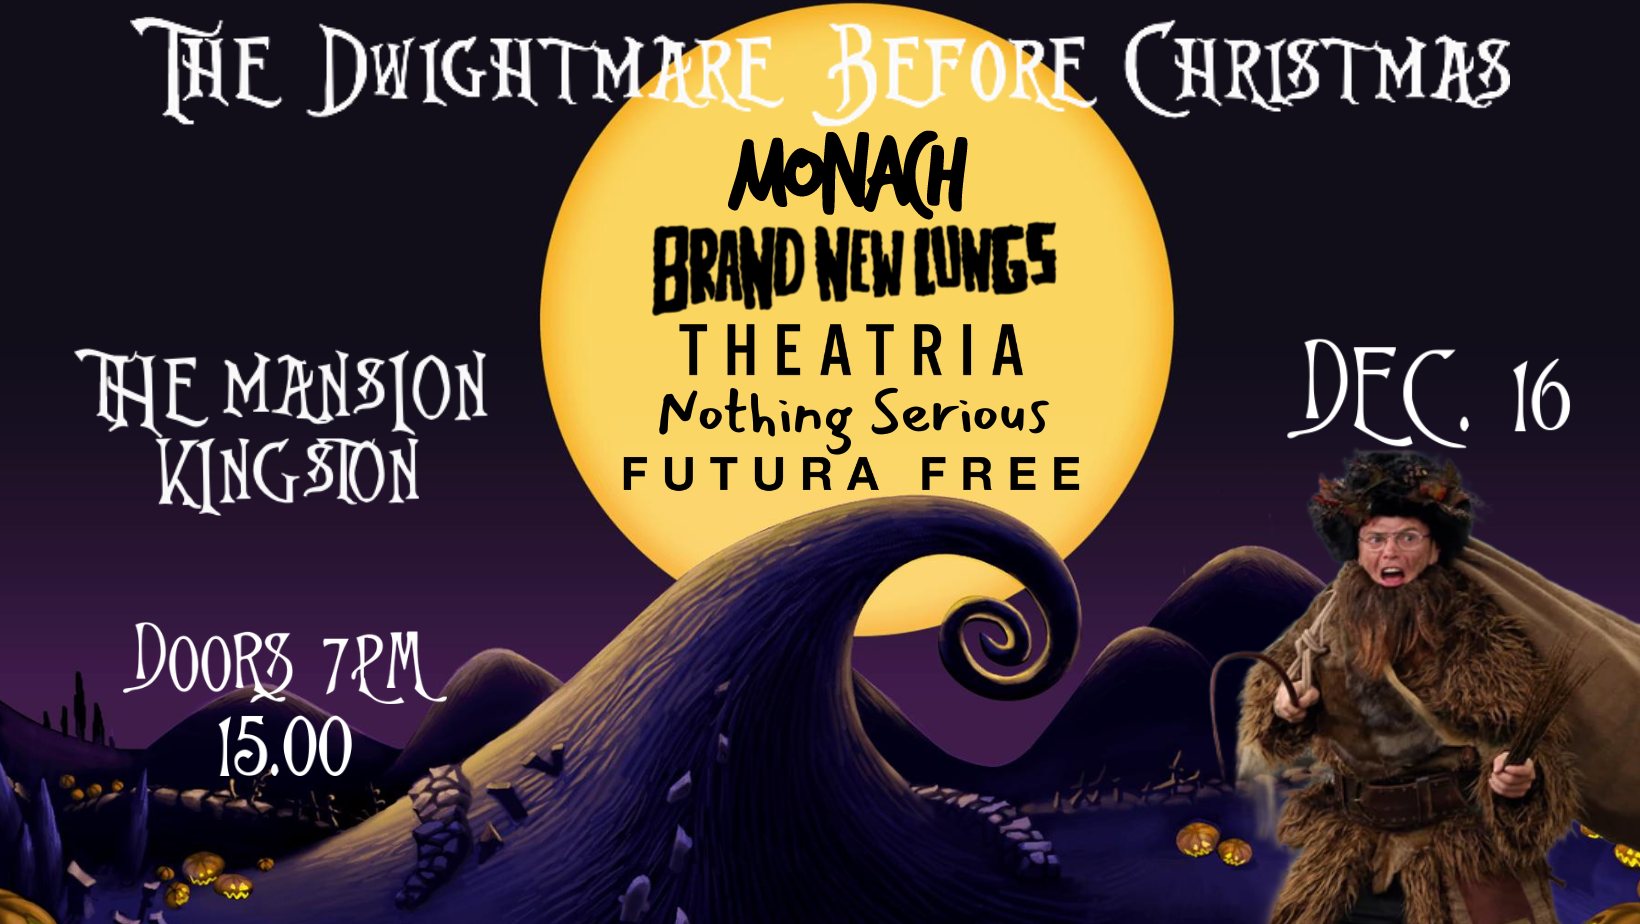 Monach, Brand New Lungs, Theatria, Futura Free and Nothing Serious